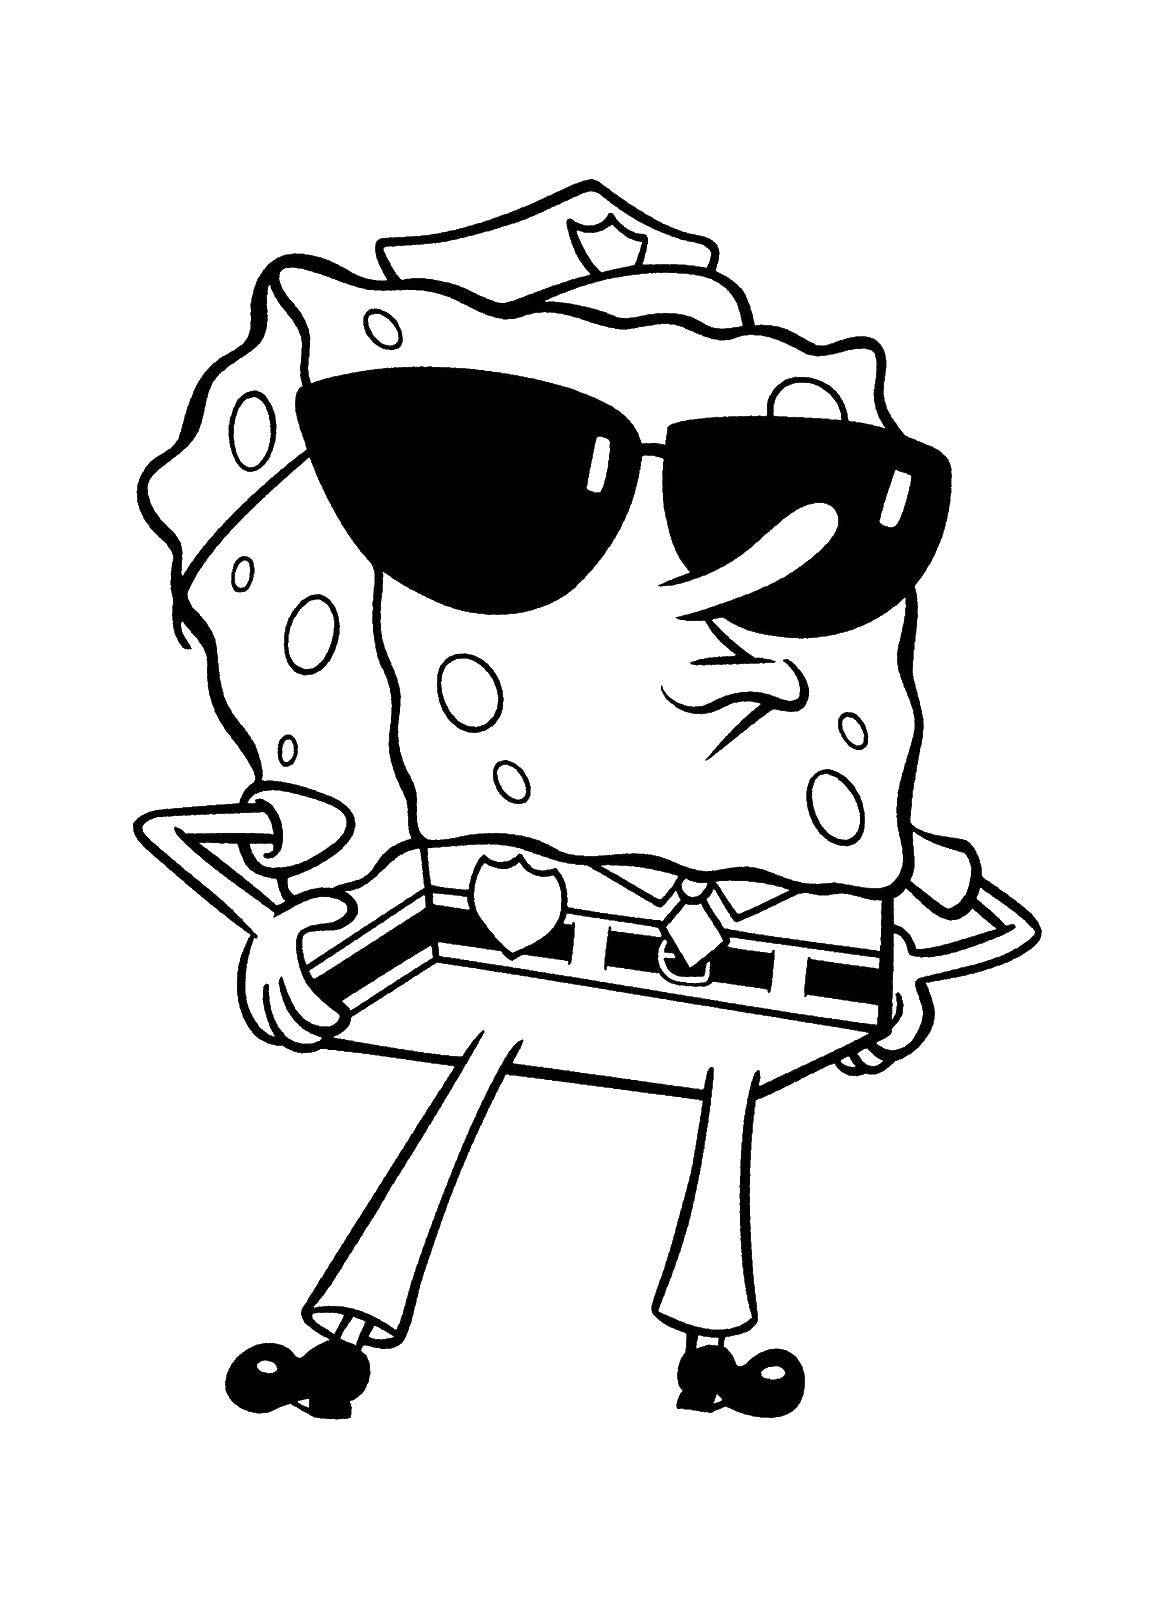 Coloring Spongebob with glasses. Category Spongebob. Tags:  The spongebob, spongebob, glasses.